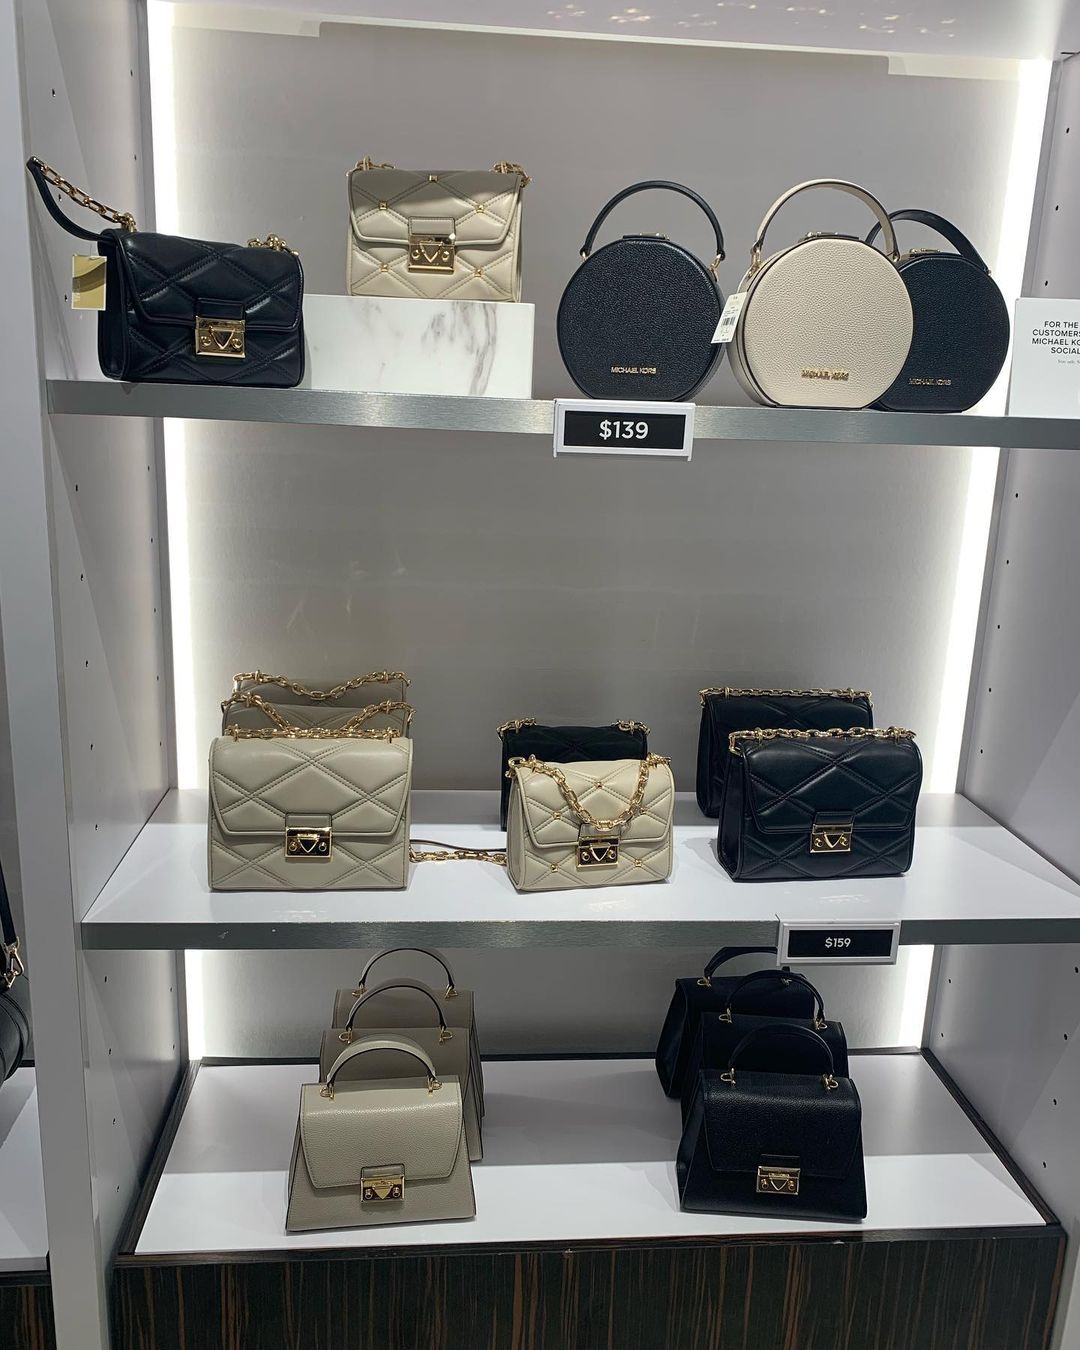 Michael Kors - Bags and Accessories Store at Orlando Premium Outlets